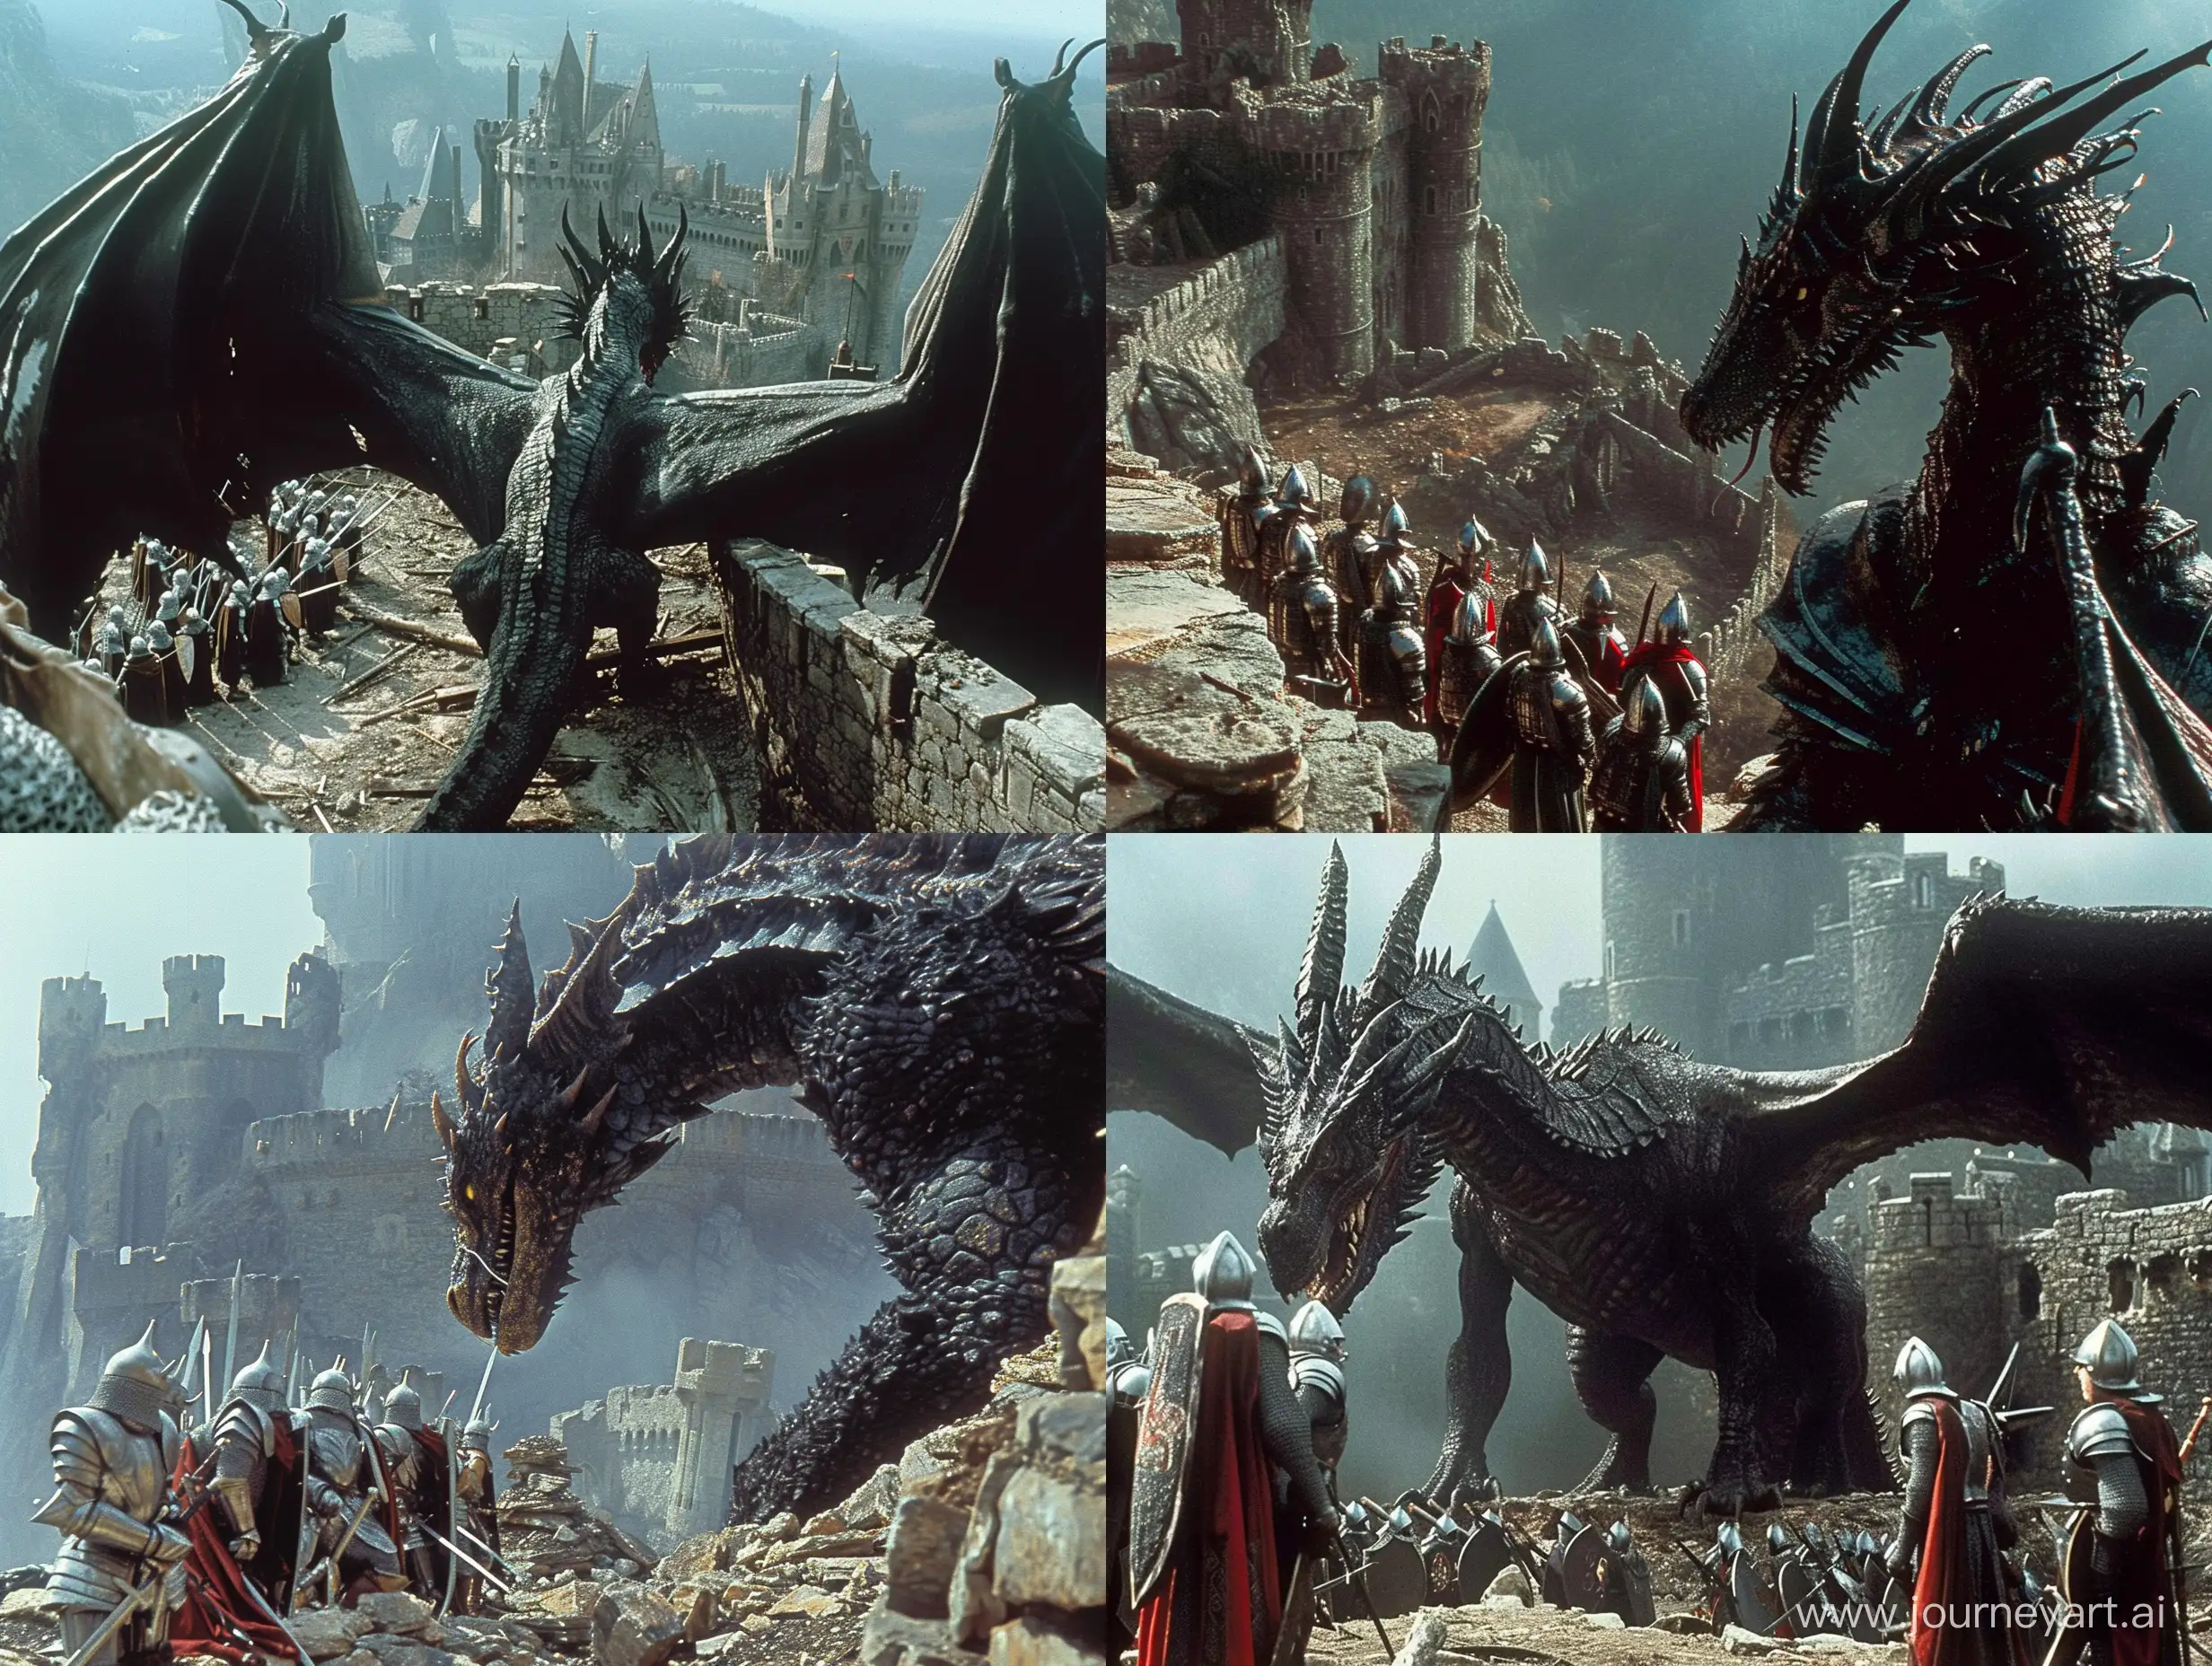 dvd screenengrabs character/arx fatalis giagantic acidic black dragon looking down on a group of knights purched a top a destroyed castle keep dark fantasy 1980 style